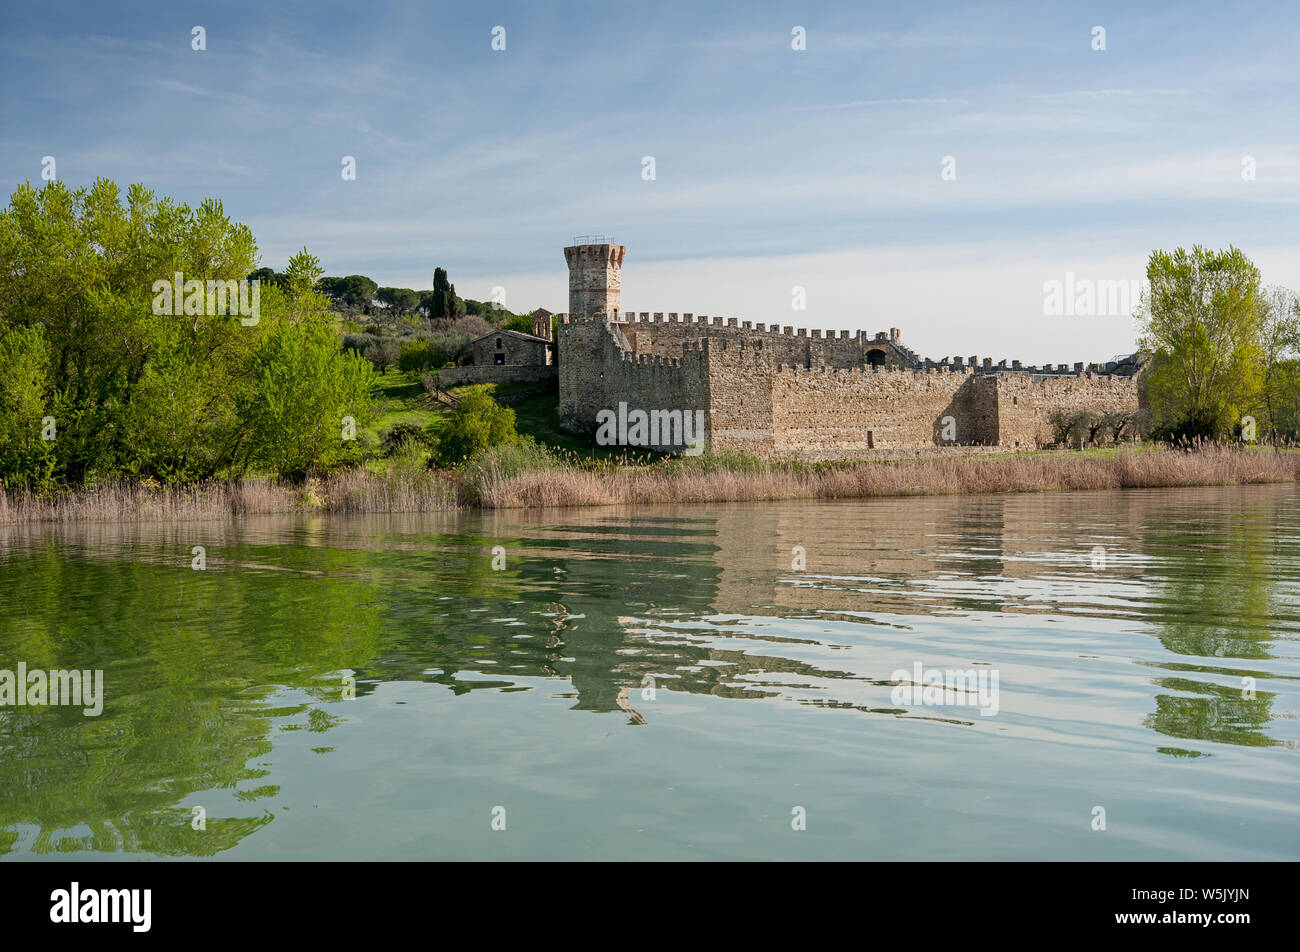 Ancient stronghold castle in Polvese island, Viterbo; Italy Stock Photo